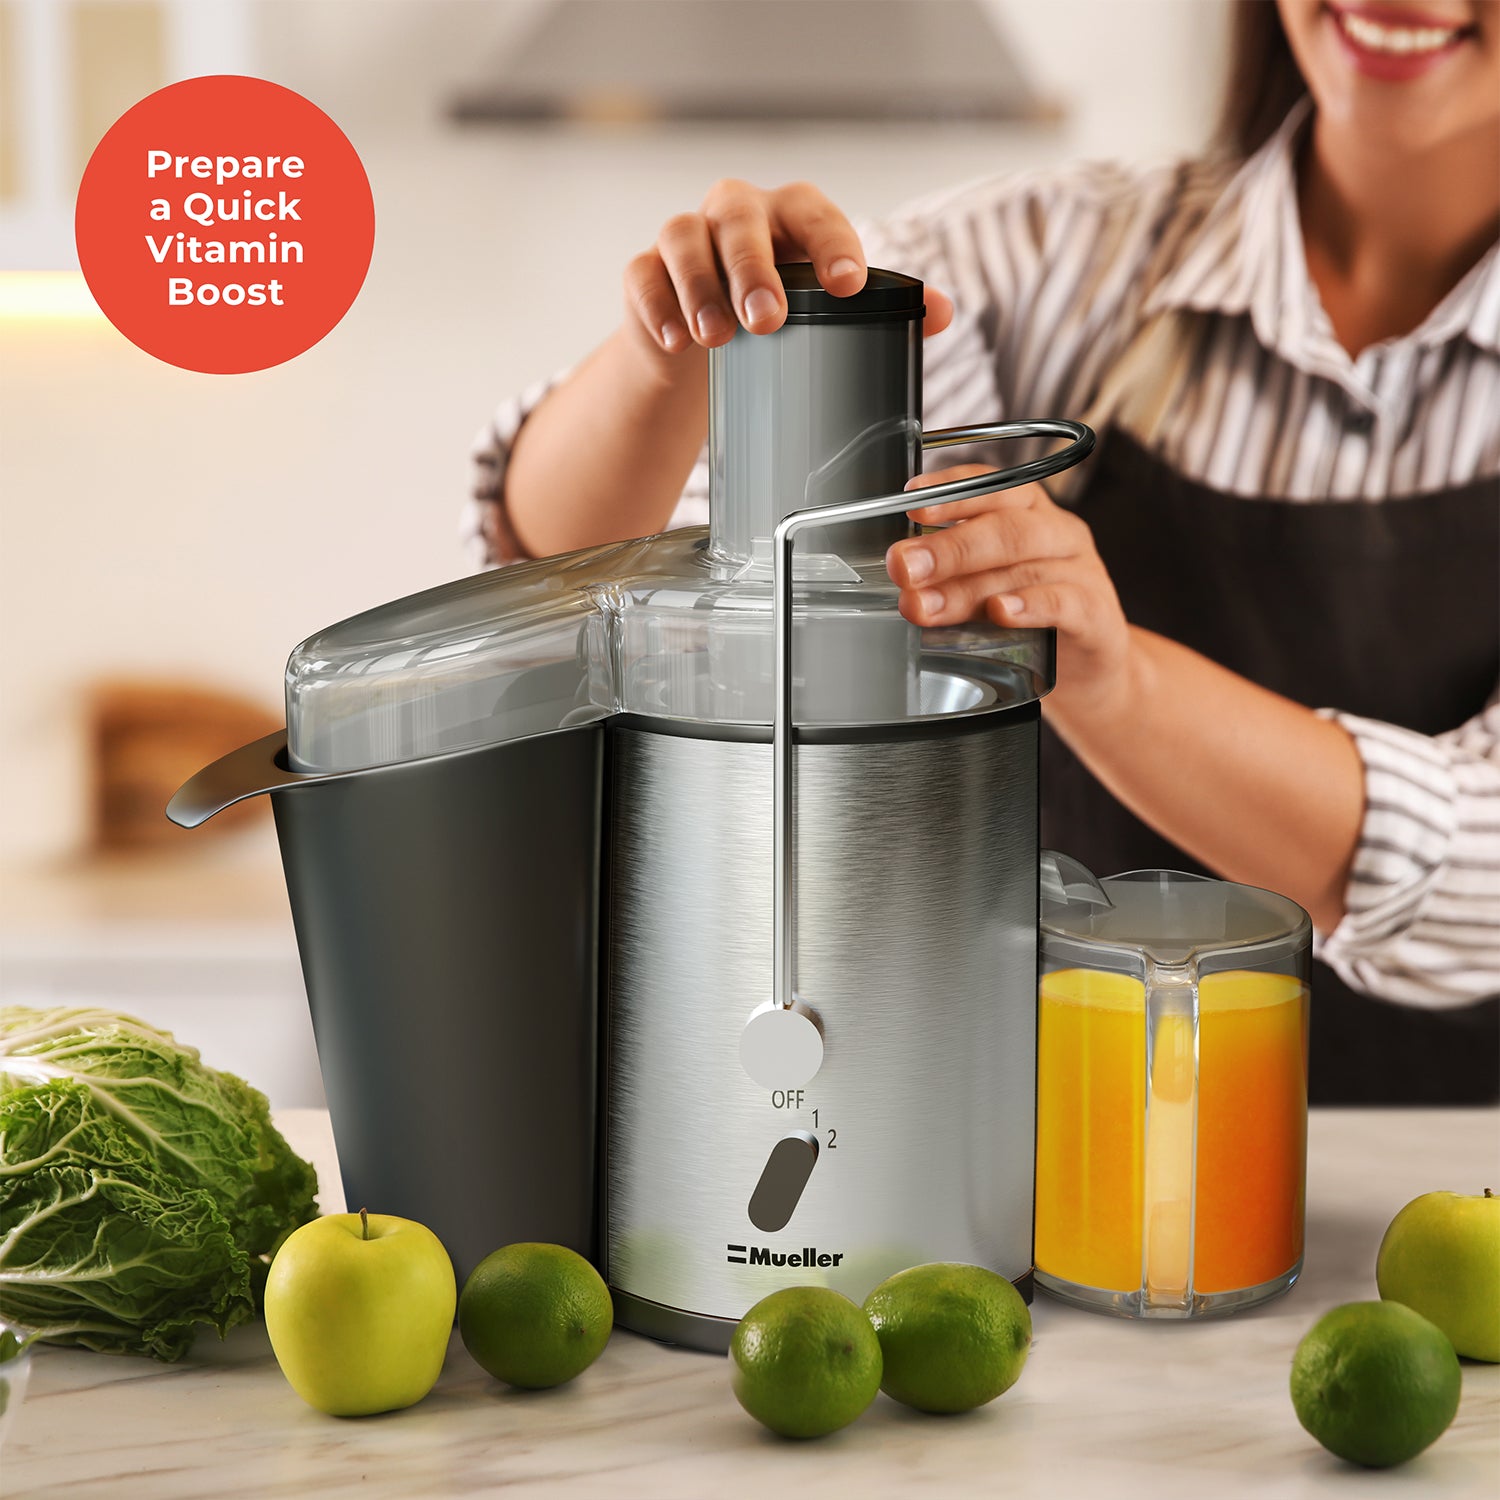 Mueller Austria Ultra Juicer Machine Extractor with Slow Cold Press  Masticating Squeezer Mechanism Technology, 3 inch Chute accepts Whole  Fruits and Vegetables, Easy Clean, Large Auction